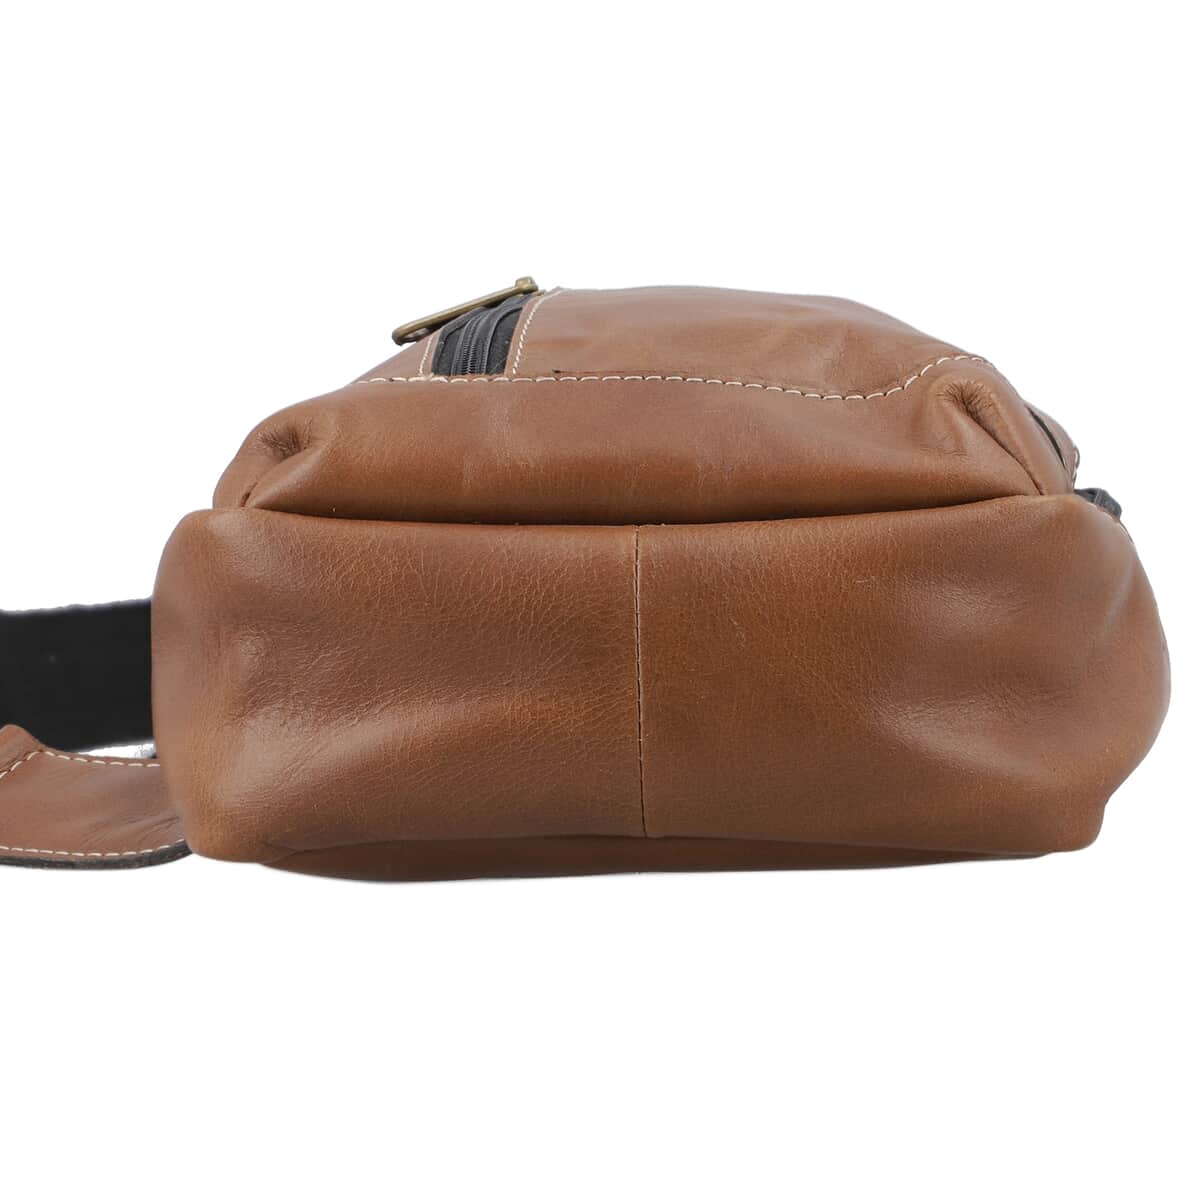 "100% Genuine Leather anti theft backpack bag Color: Beige Size: 5.9L x 3.2W x 8.66H inches " image number 4